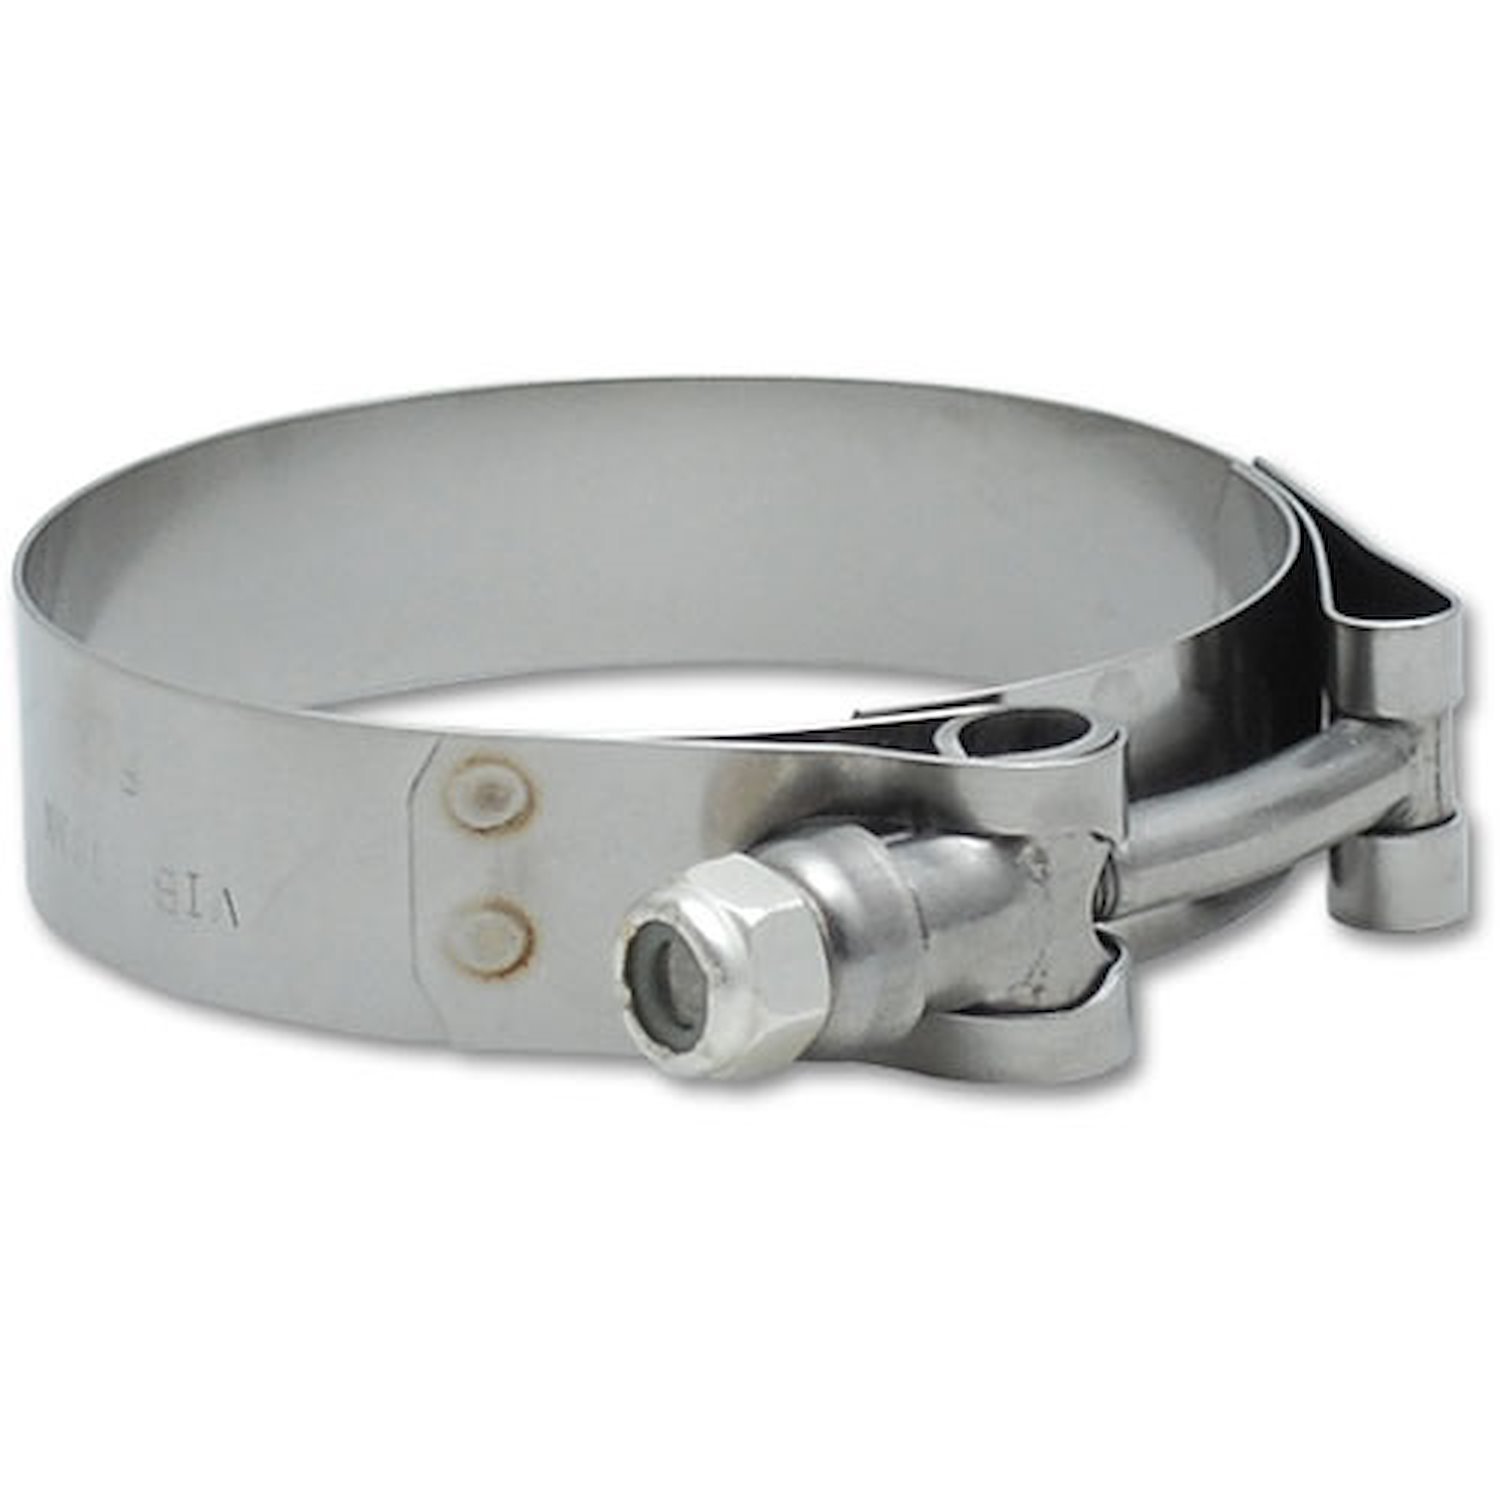 Stainless Steel T-Bolt Clamps Clamp Range 6.28" - 6.59"